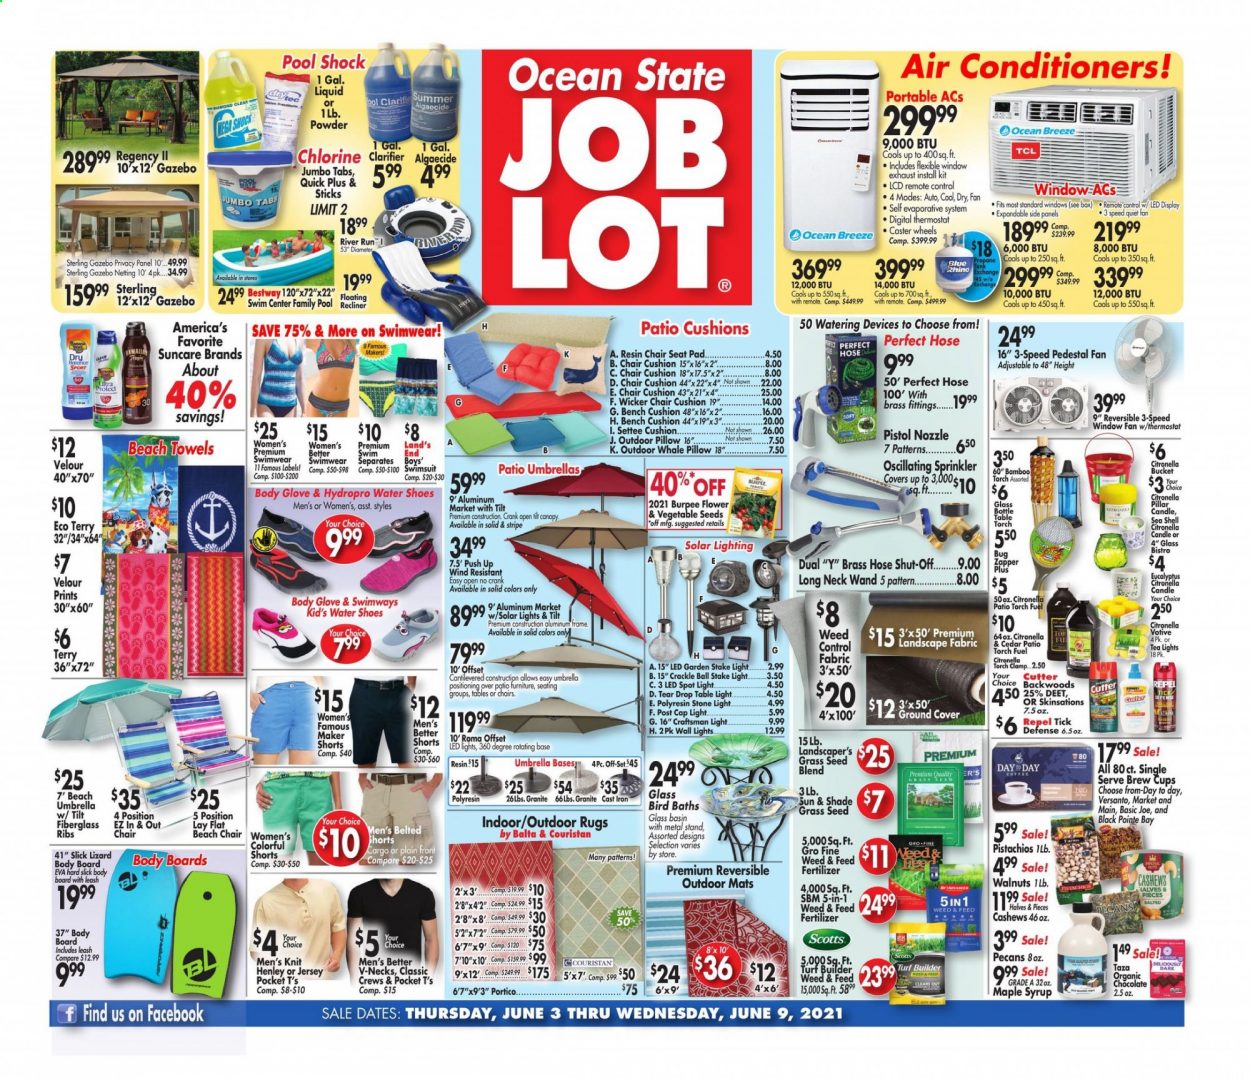 thumbnail - Ocean State Job Lot Flyer - 06/03/2021 - 06/09/2021 - Sales products - shoes, cup, candle, spotlight, bench cushion, cushion, pillow, beach towel, TCL, remote control, air conditioner, stand fan, window fan, bench, shorts, jersey, gloves, umbrella, swimming suit, torch, pistol, LED light, rug, Craftsman, gazebo, pool, plant seeds, fertilizer, turf builder, garden stake, grass seed, Shell. Page 1.